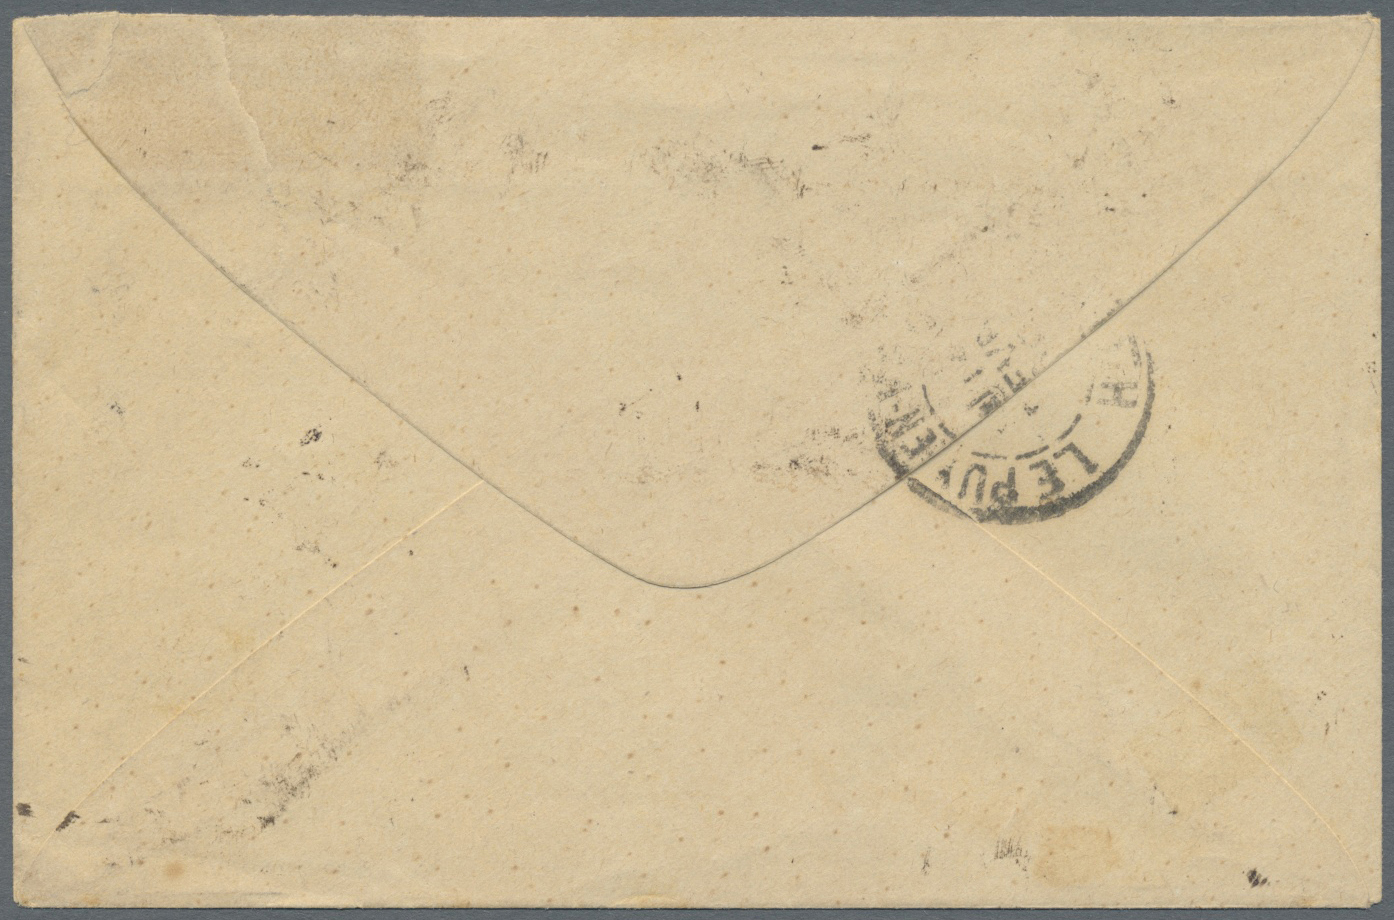 GA Kambodscha: 1898. French Indo-China Postal Stationery Envelope 5c Green Cancelled By Pnompenh/Cambodge Double Ring '6 - Cambodia